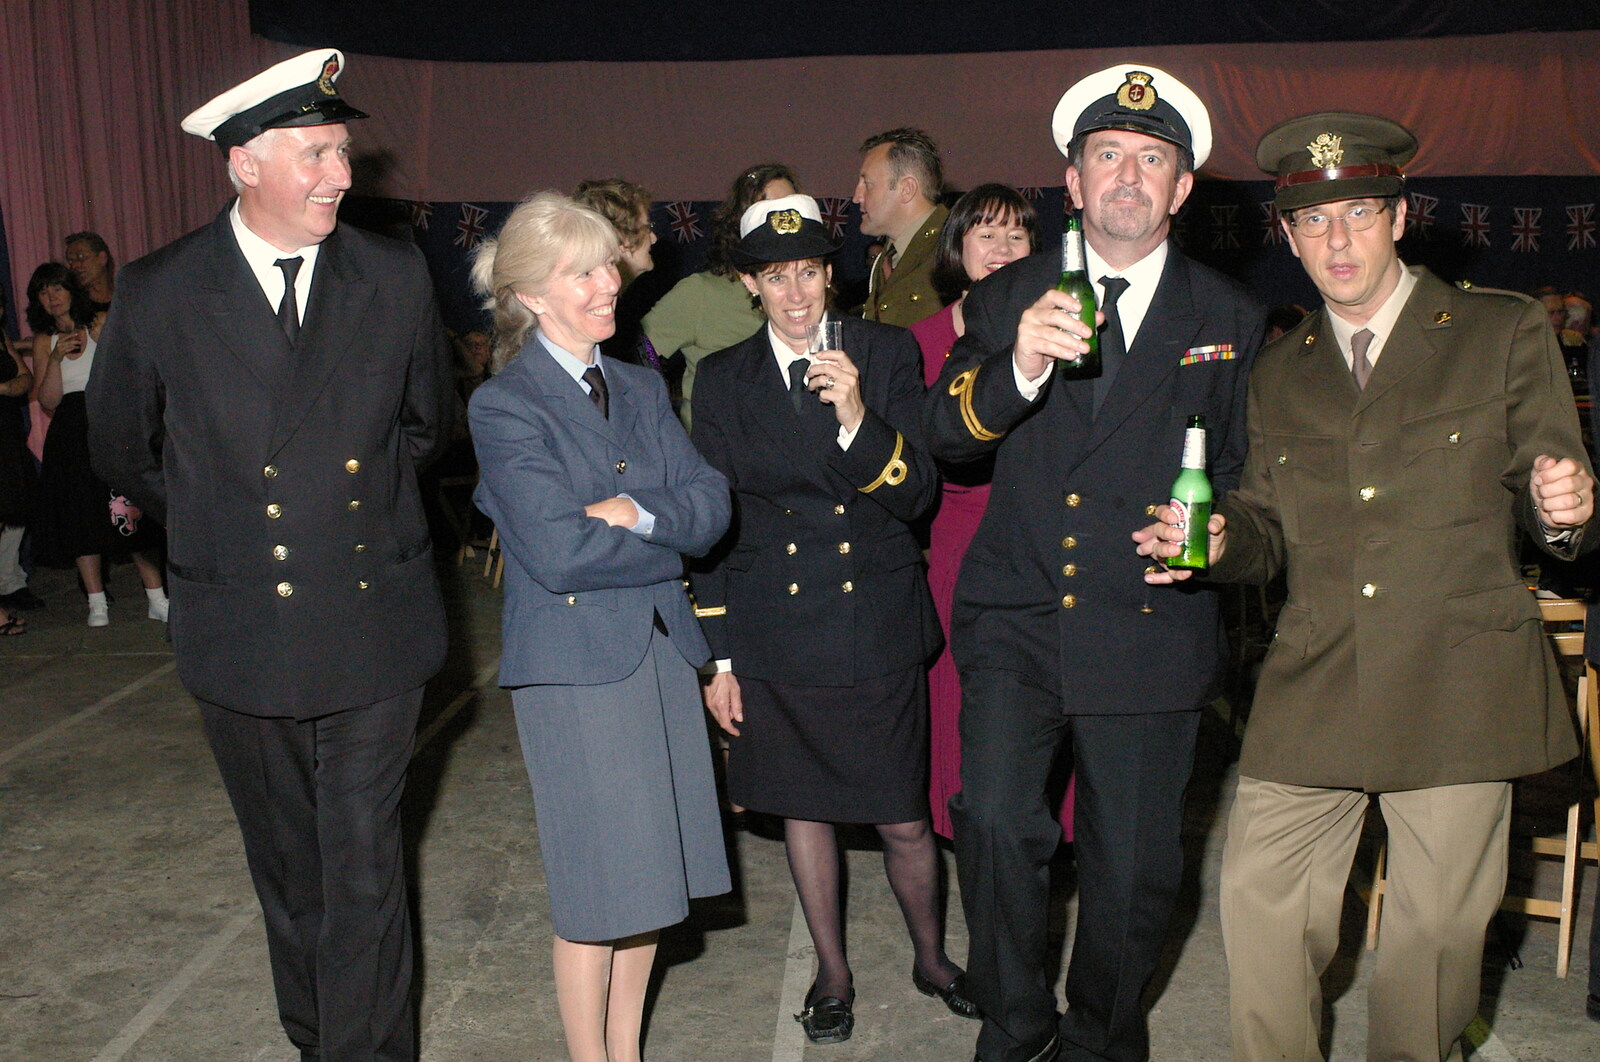 The Navy squad from Another 1940s Dance, Ellough Airfield, Beccles, Suffolk - 24th June 2005